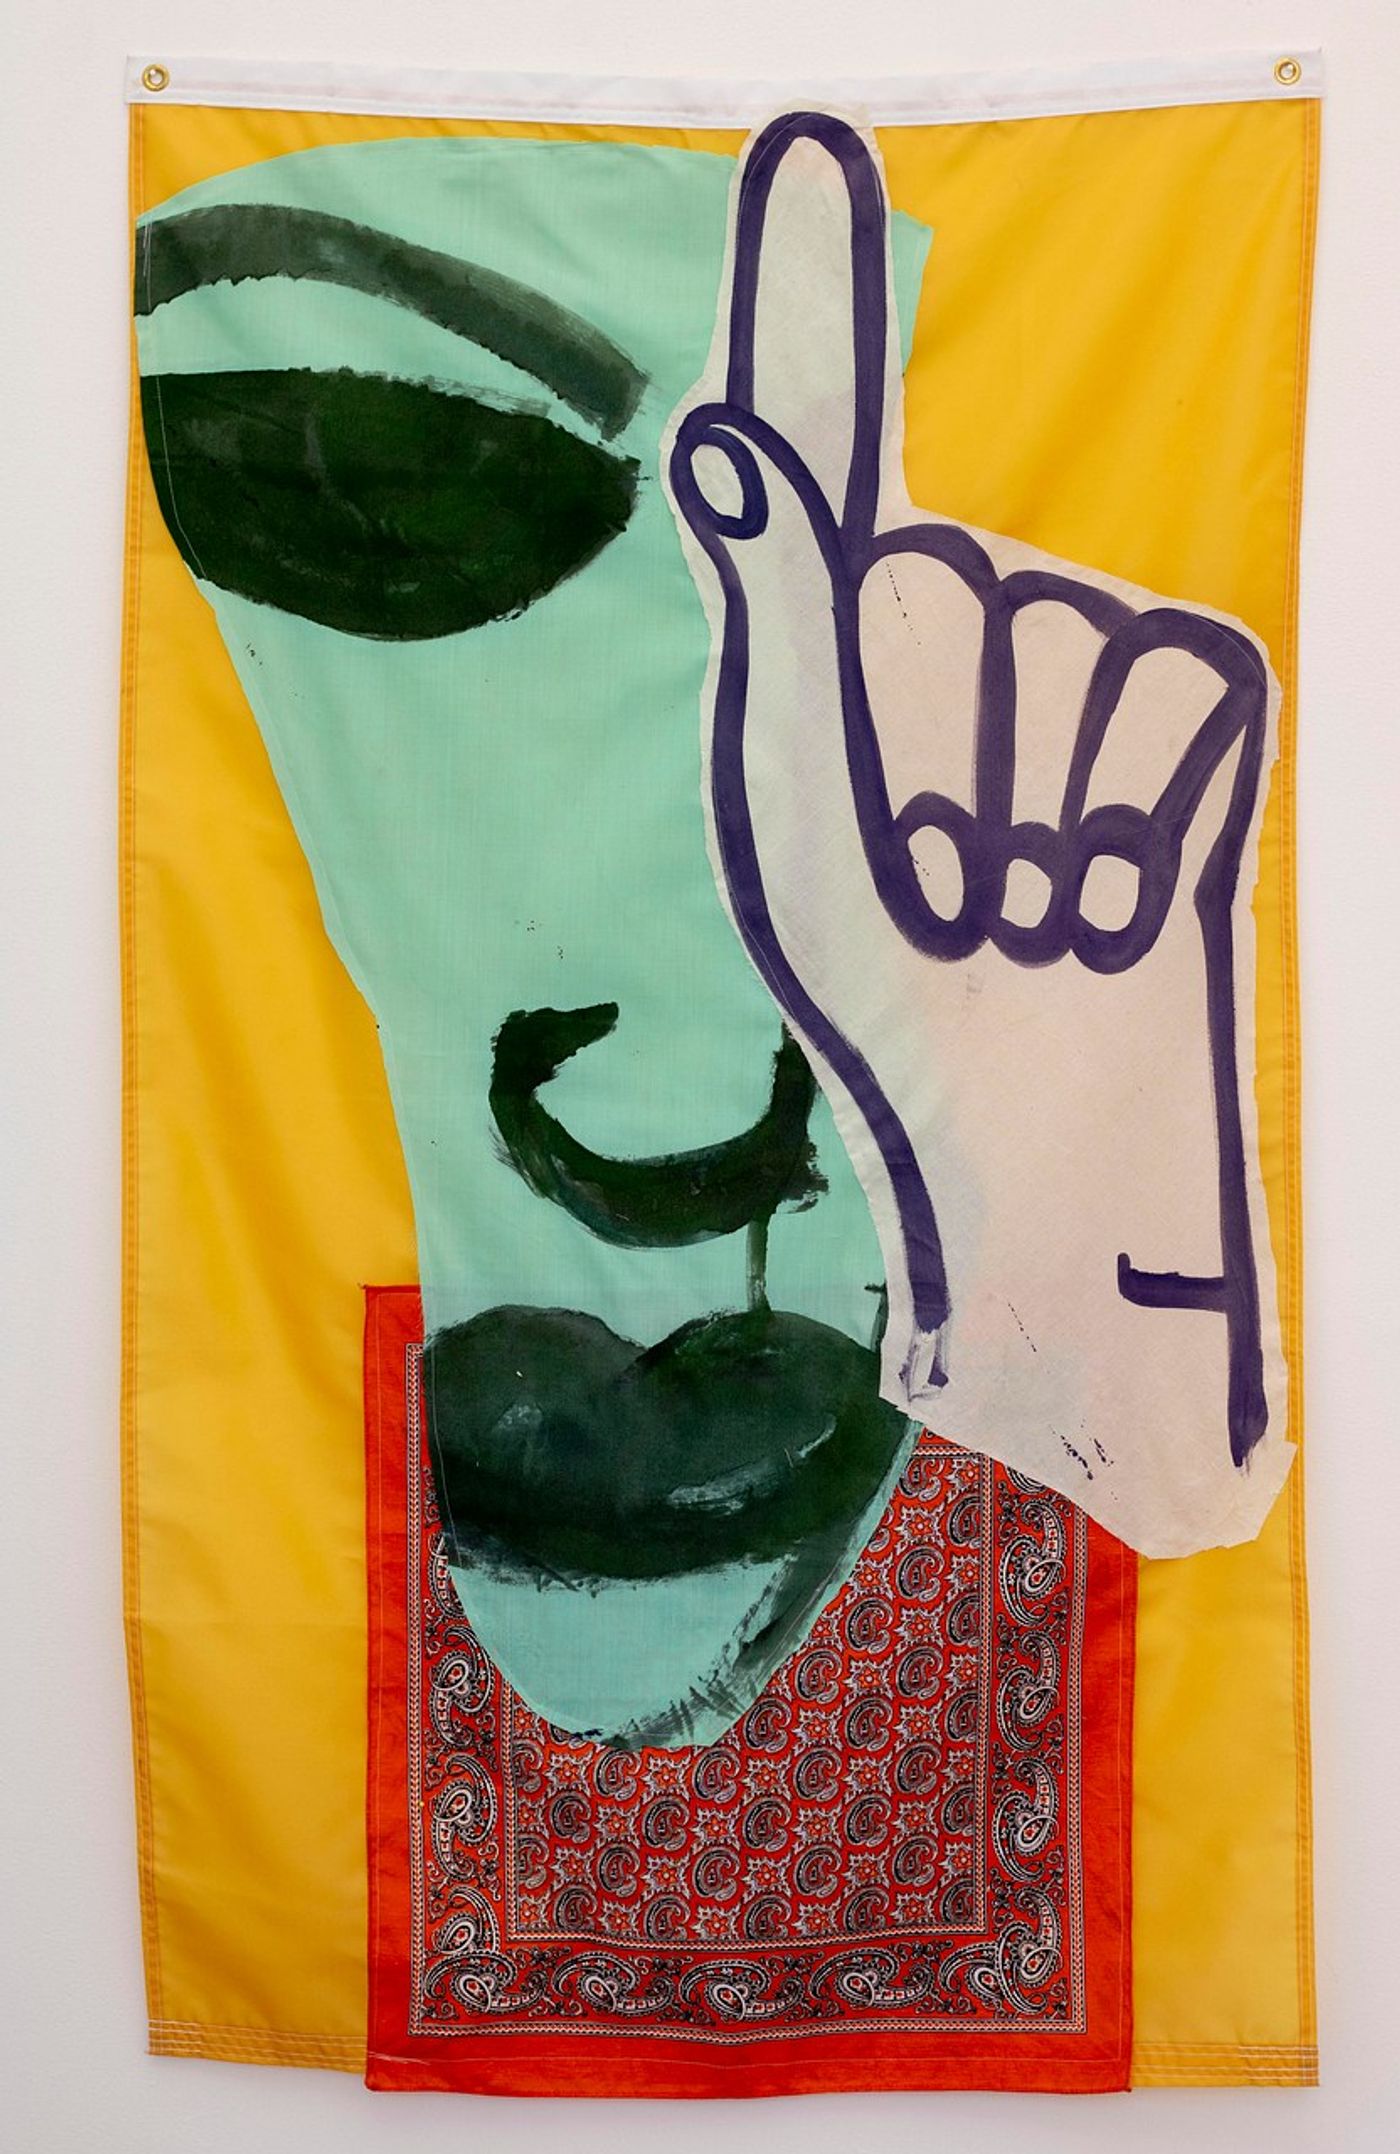 Image of Untitled (Up), 2022: Fabric and paint on flag